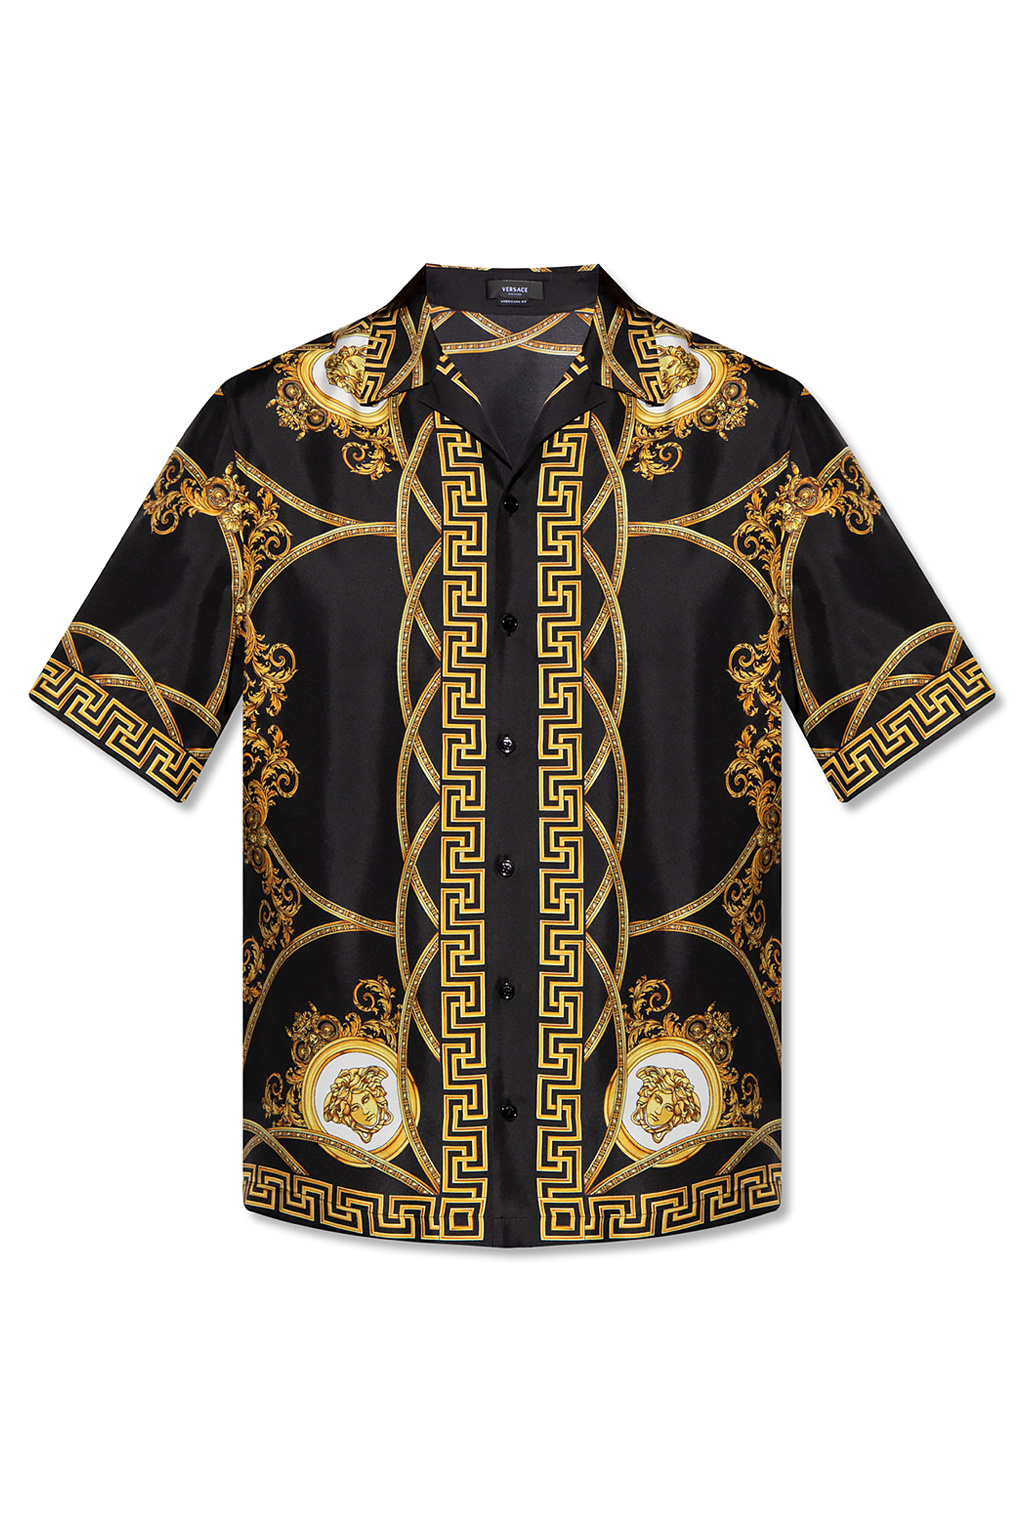 Versace Kids Silk shirt with short sleeves, Kids's Boys clothes (4-14  years)